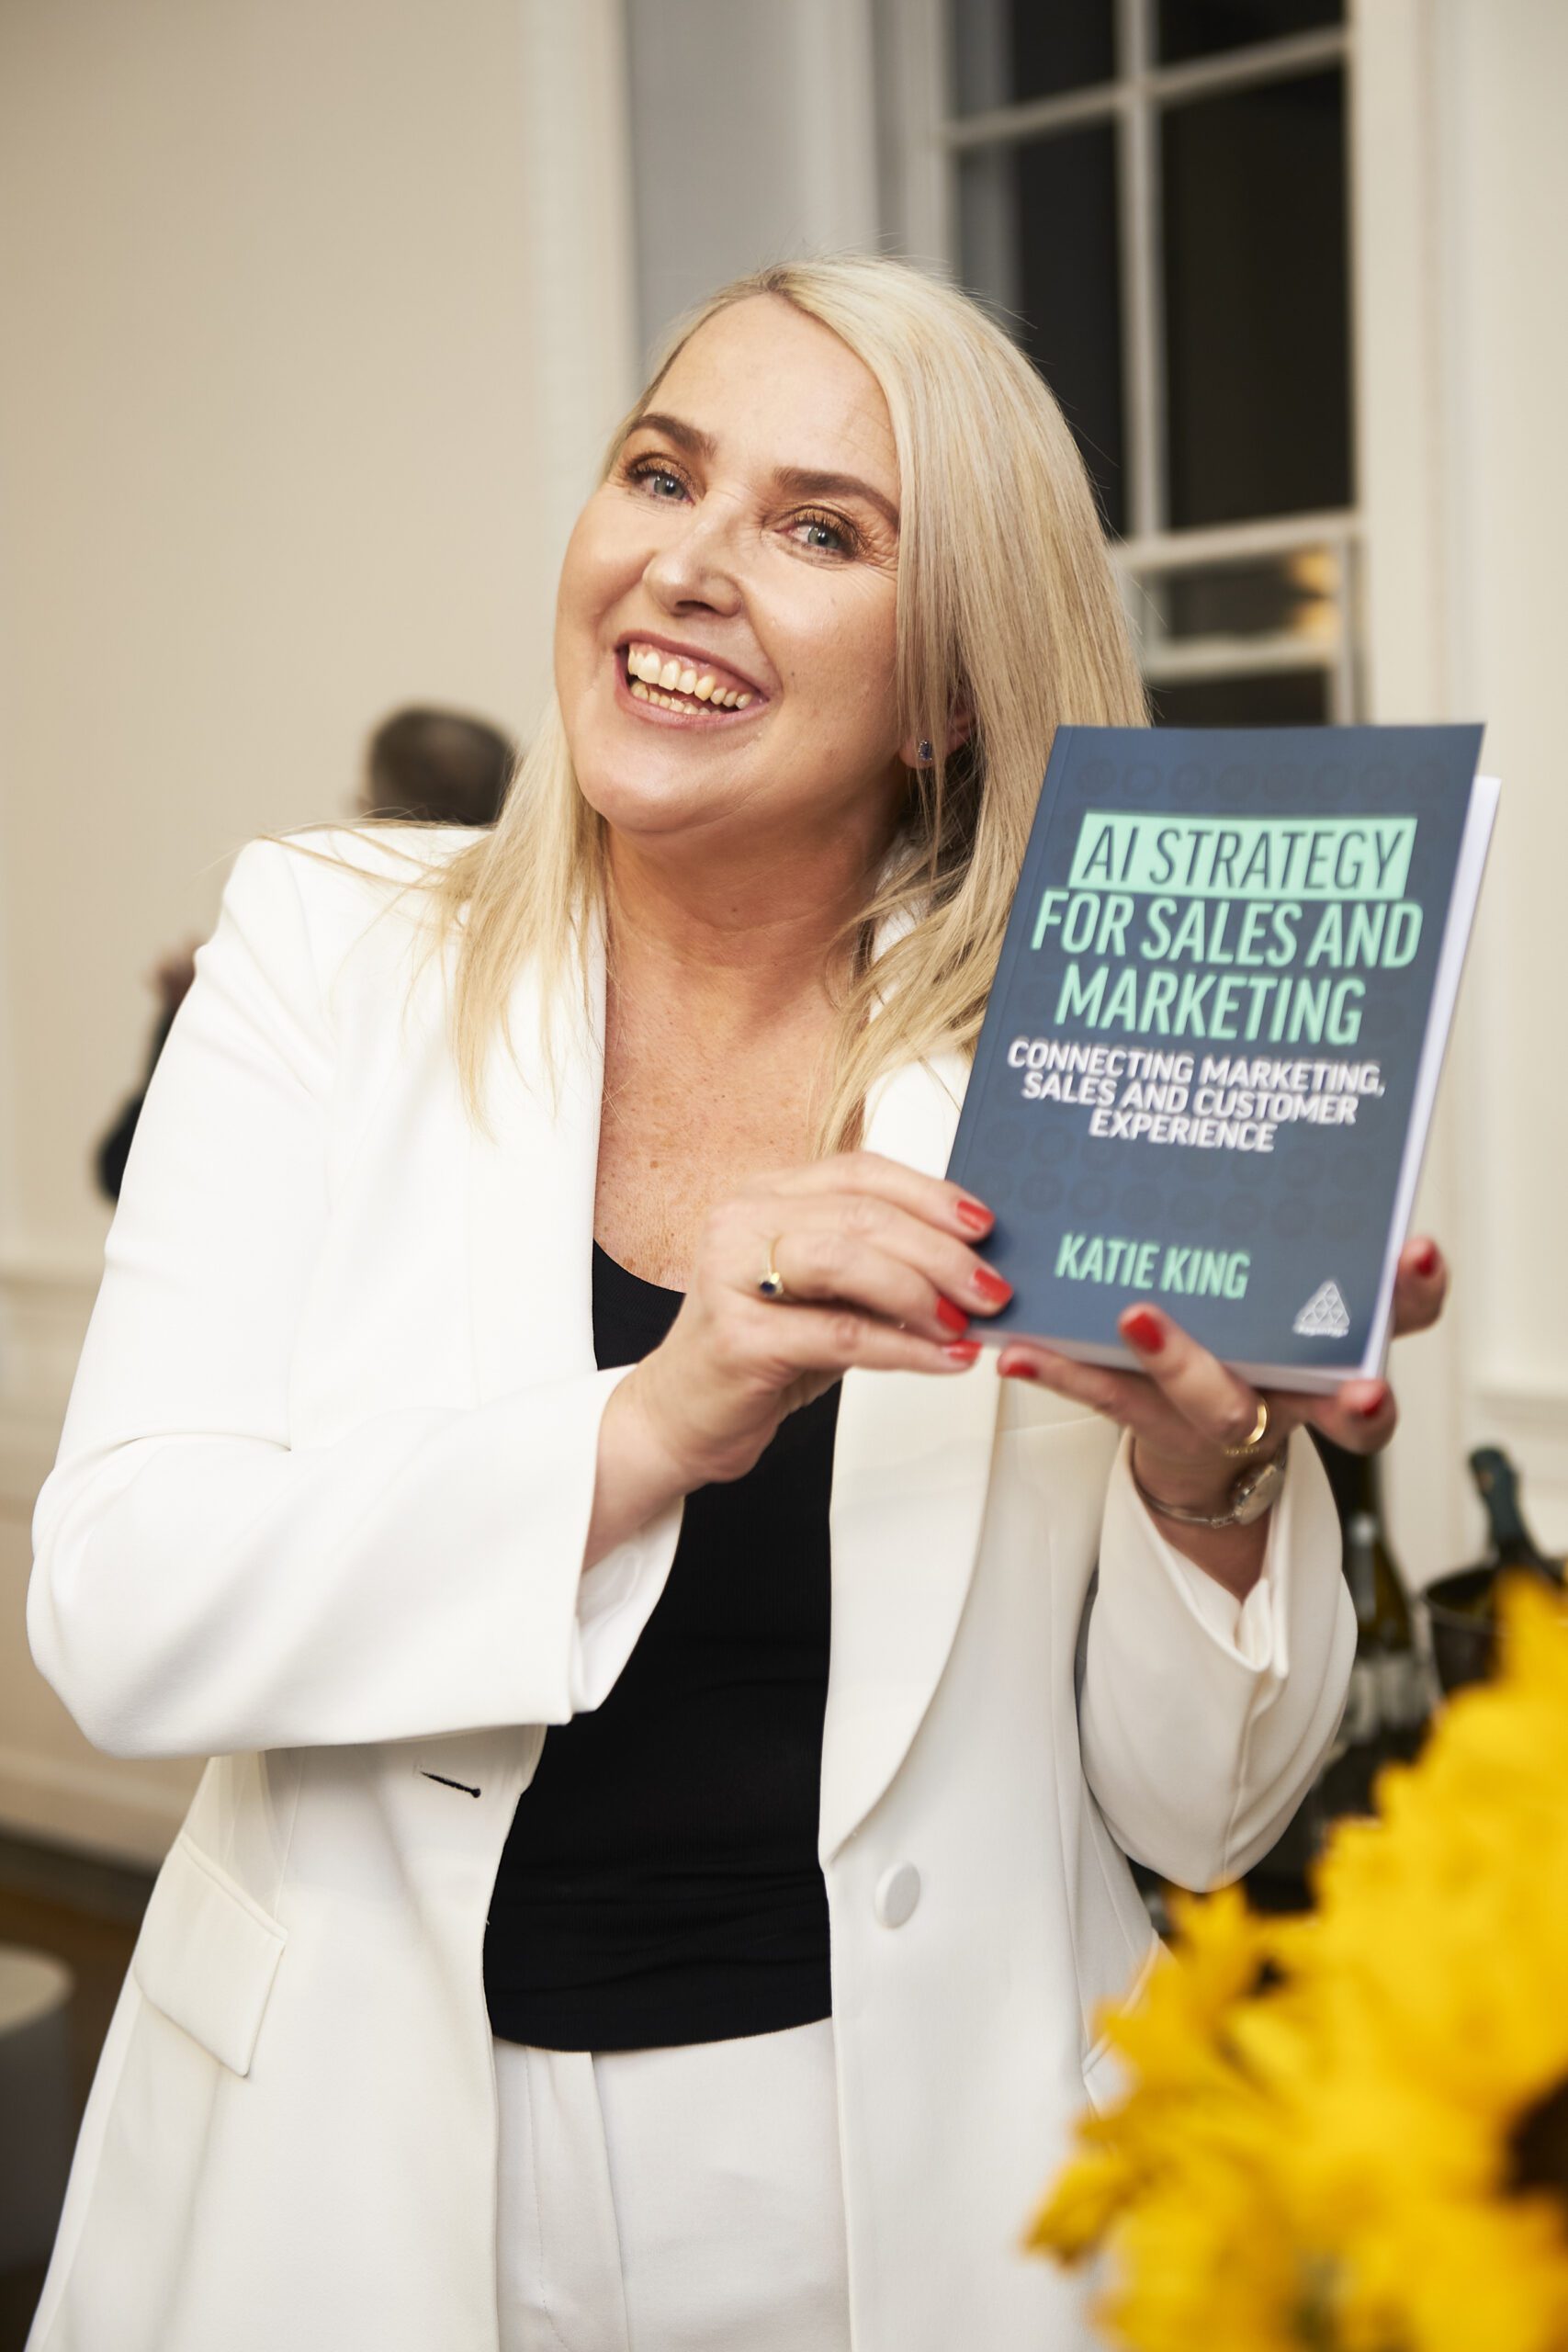 Katie King, speaking at Let's Do Business, holding a book about AI